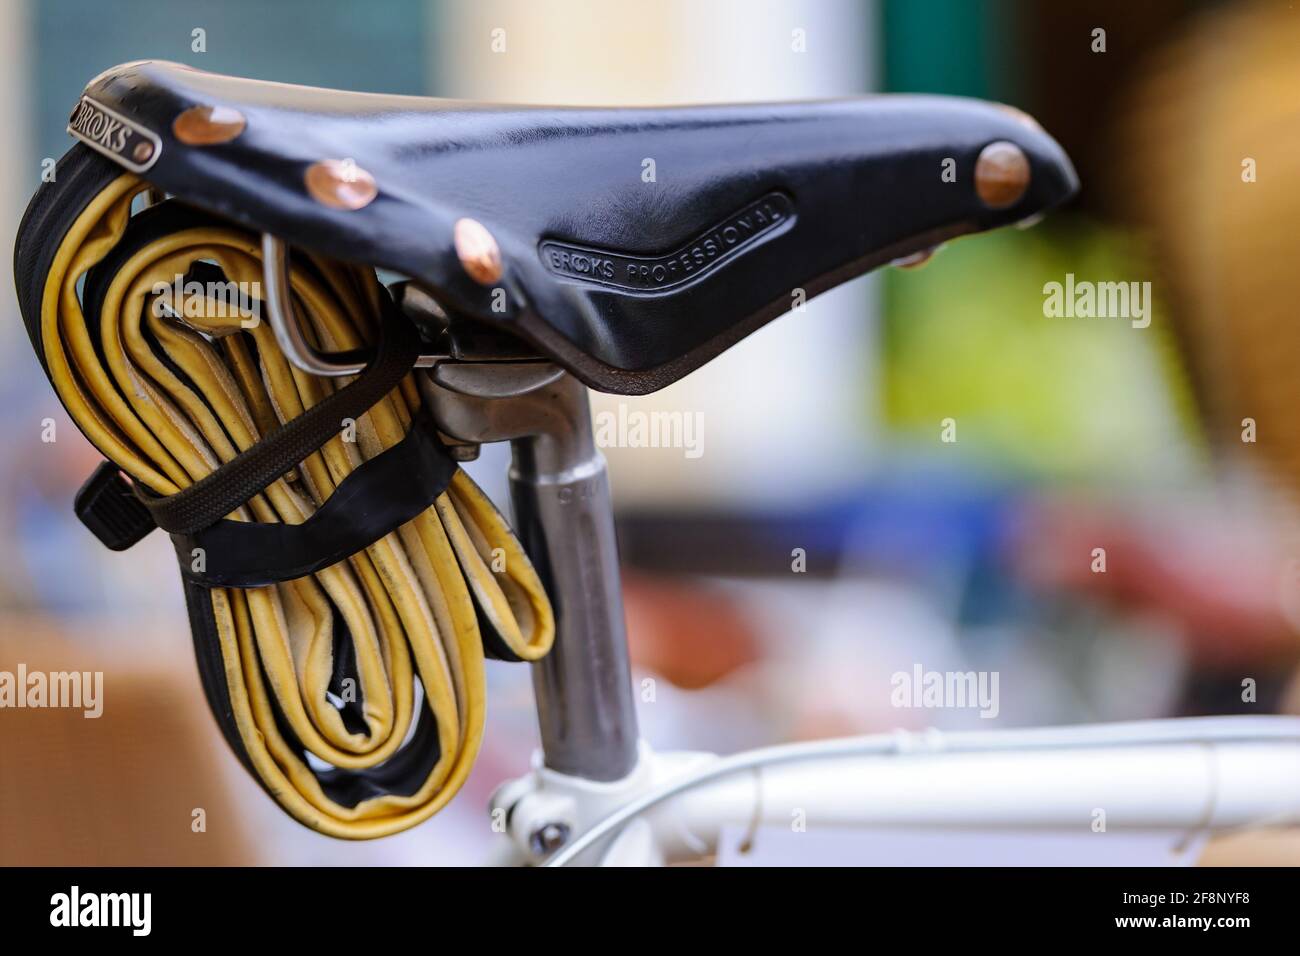 niedersulz, austria, 12 june 2016, tubular tire and brooks leather addle on a classic road bike at tha vintage bicycle event in velo veritas Stock Photo